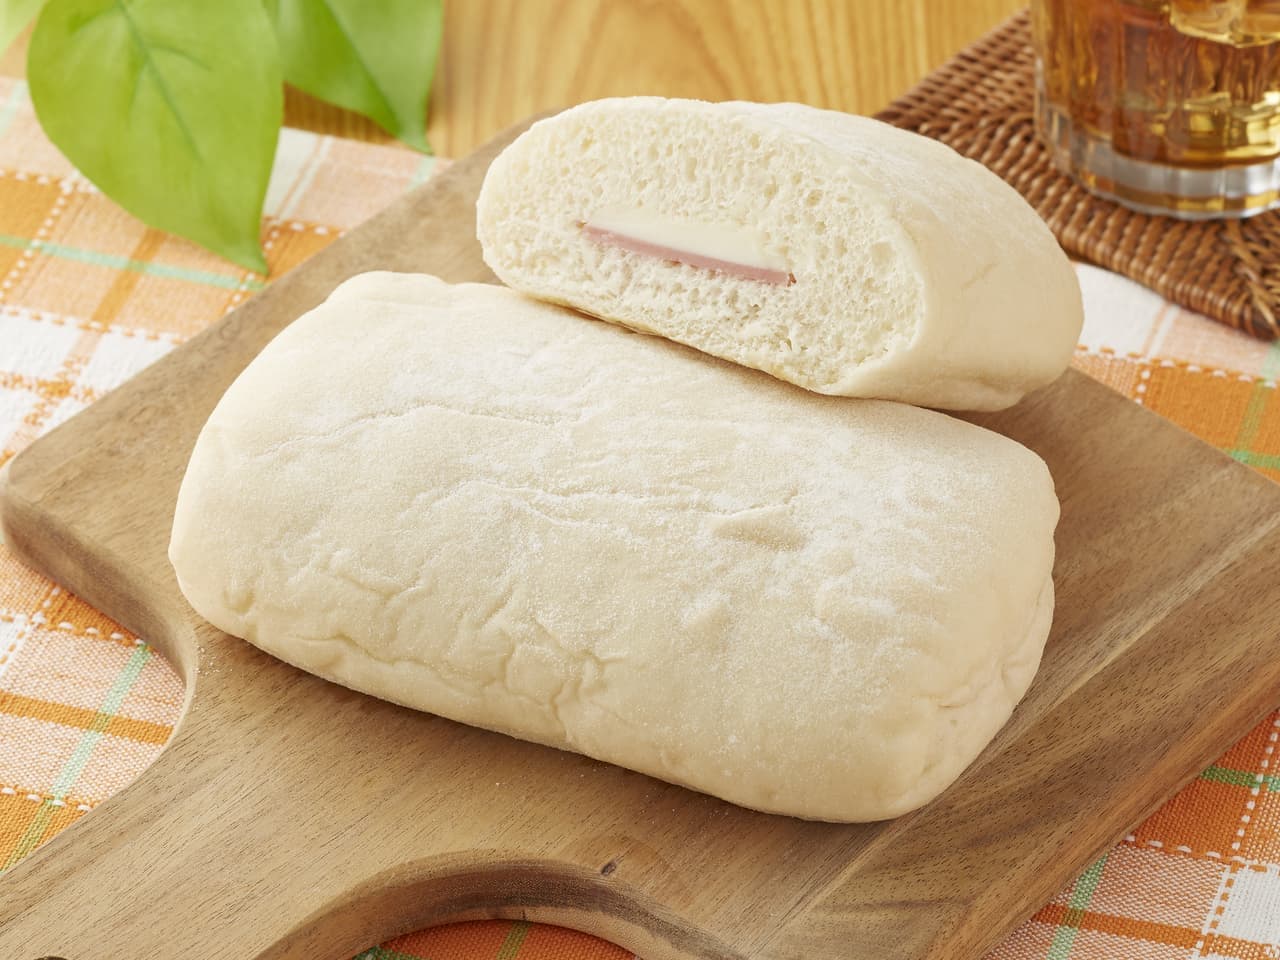 MINISTOP "Ham and Cheese Bread (Camembert Flavor) - 15% increase in product weight!